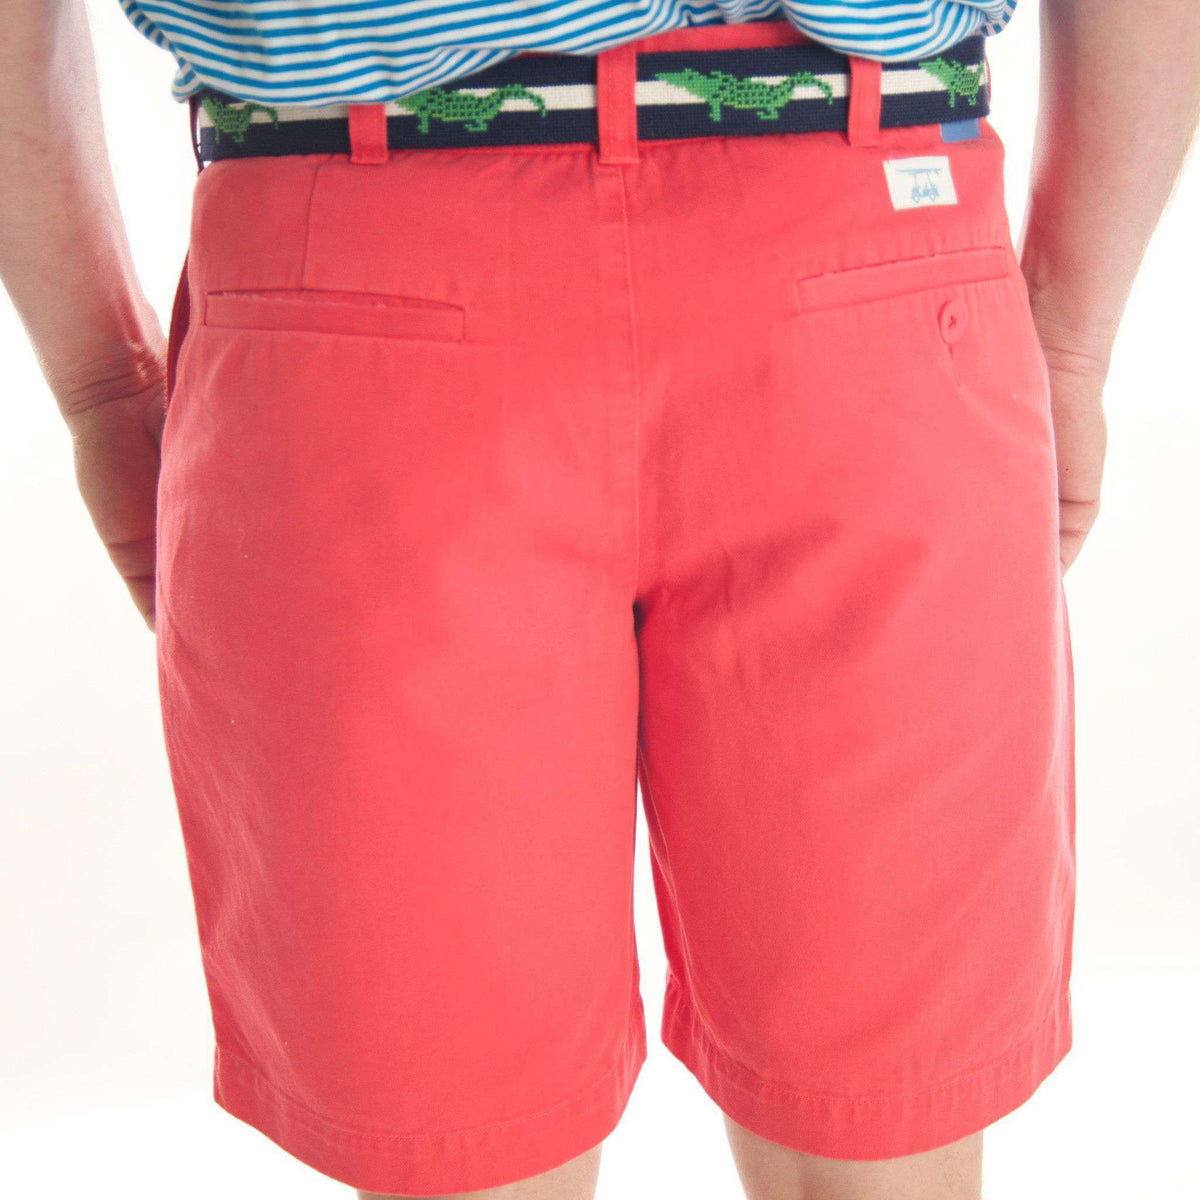 Cape Creek Short in Red by Bald Head Blues - Country Club Prep